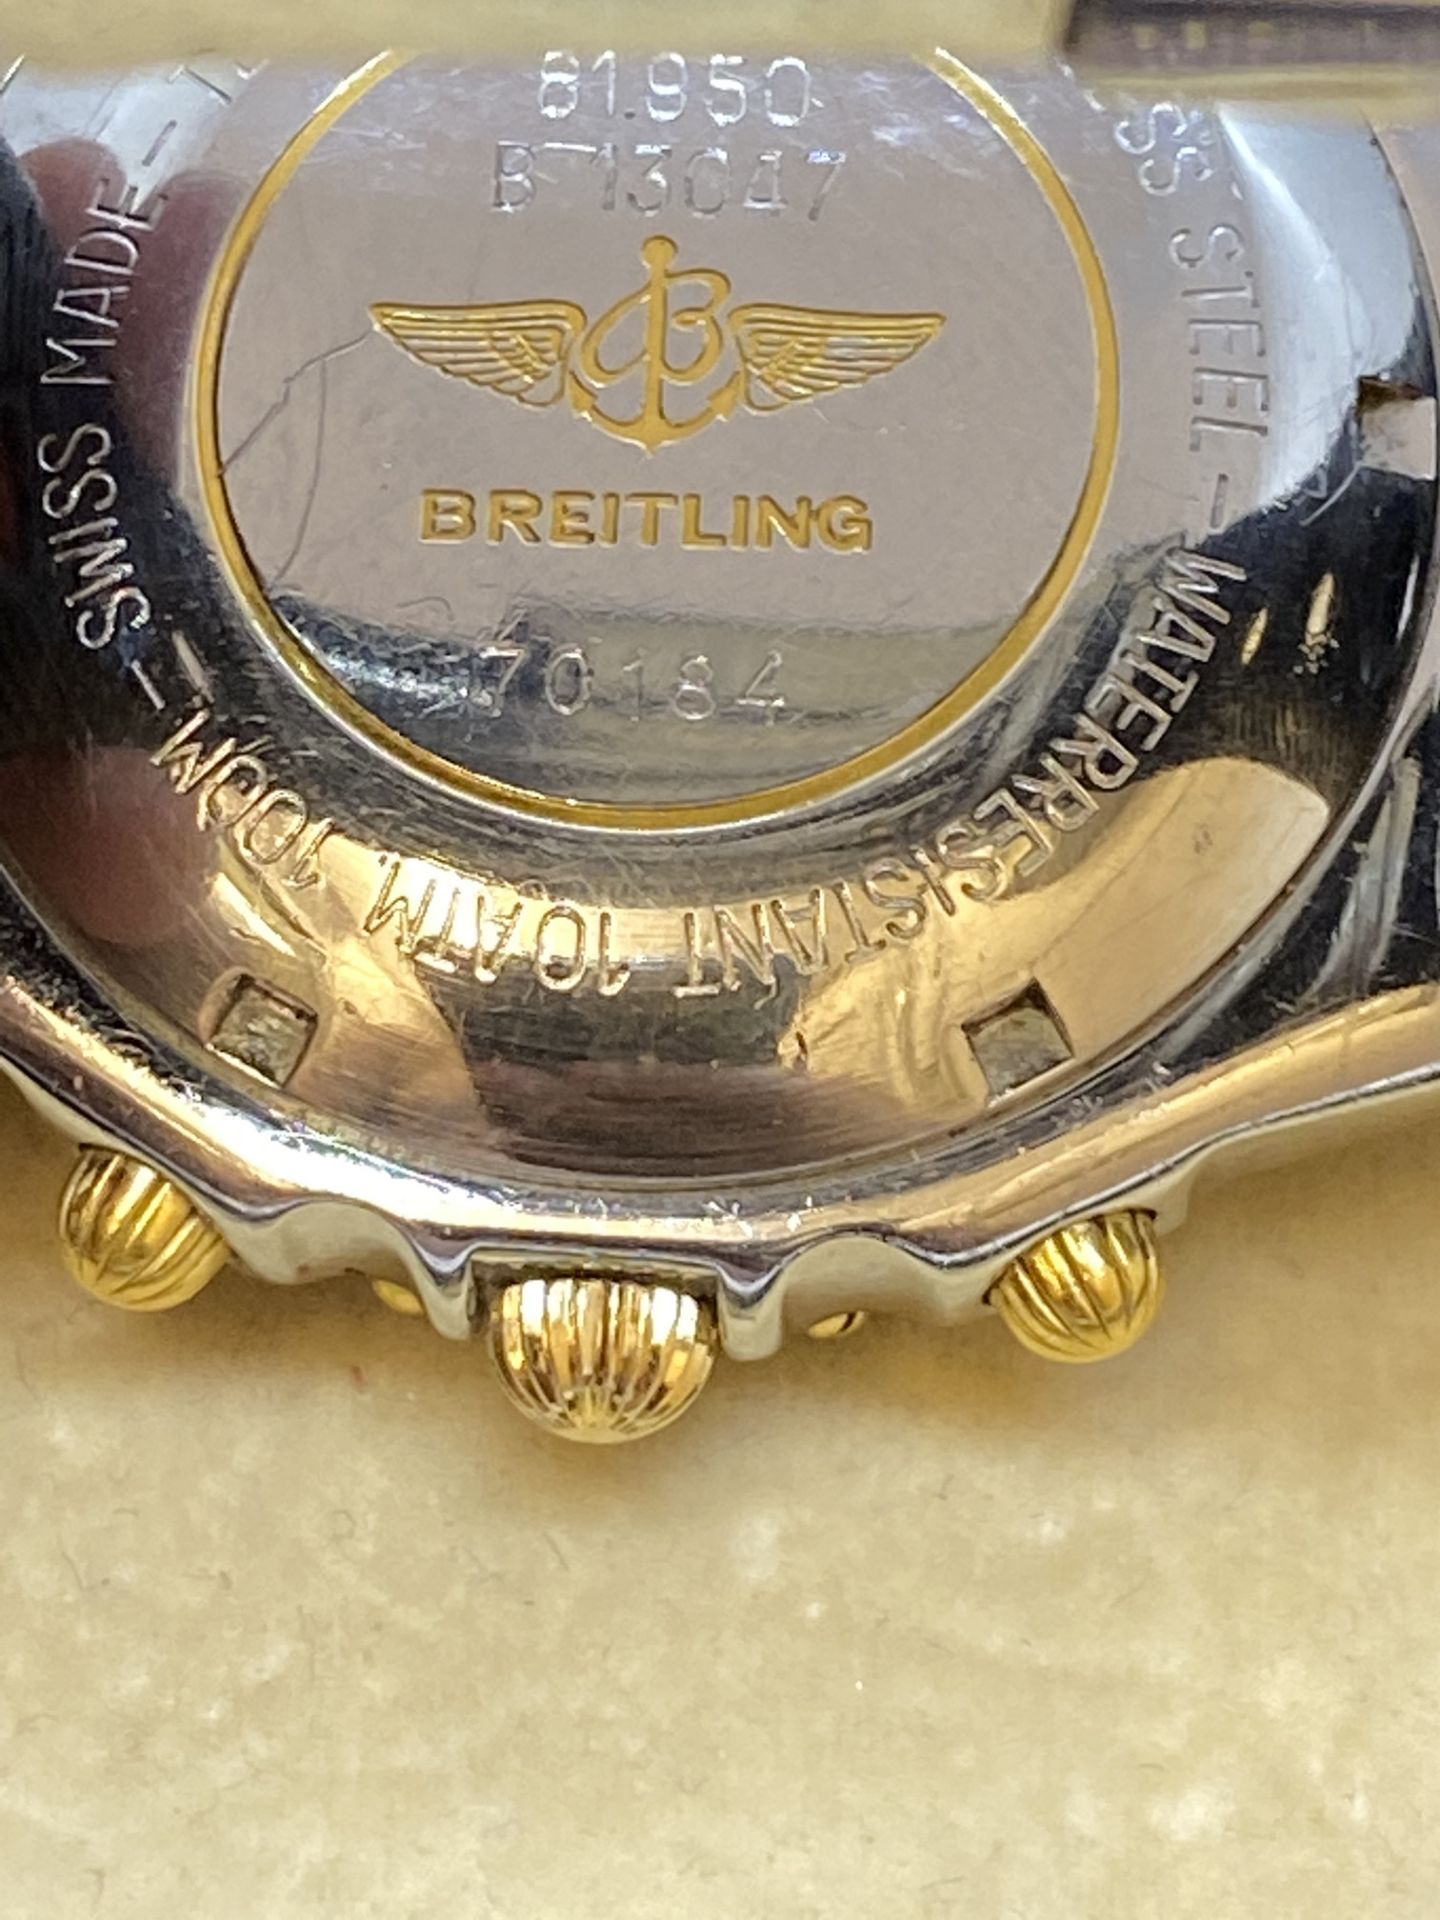 BREITLING STEEL & GOLD GENTS WATCH - Image 7 of 14